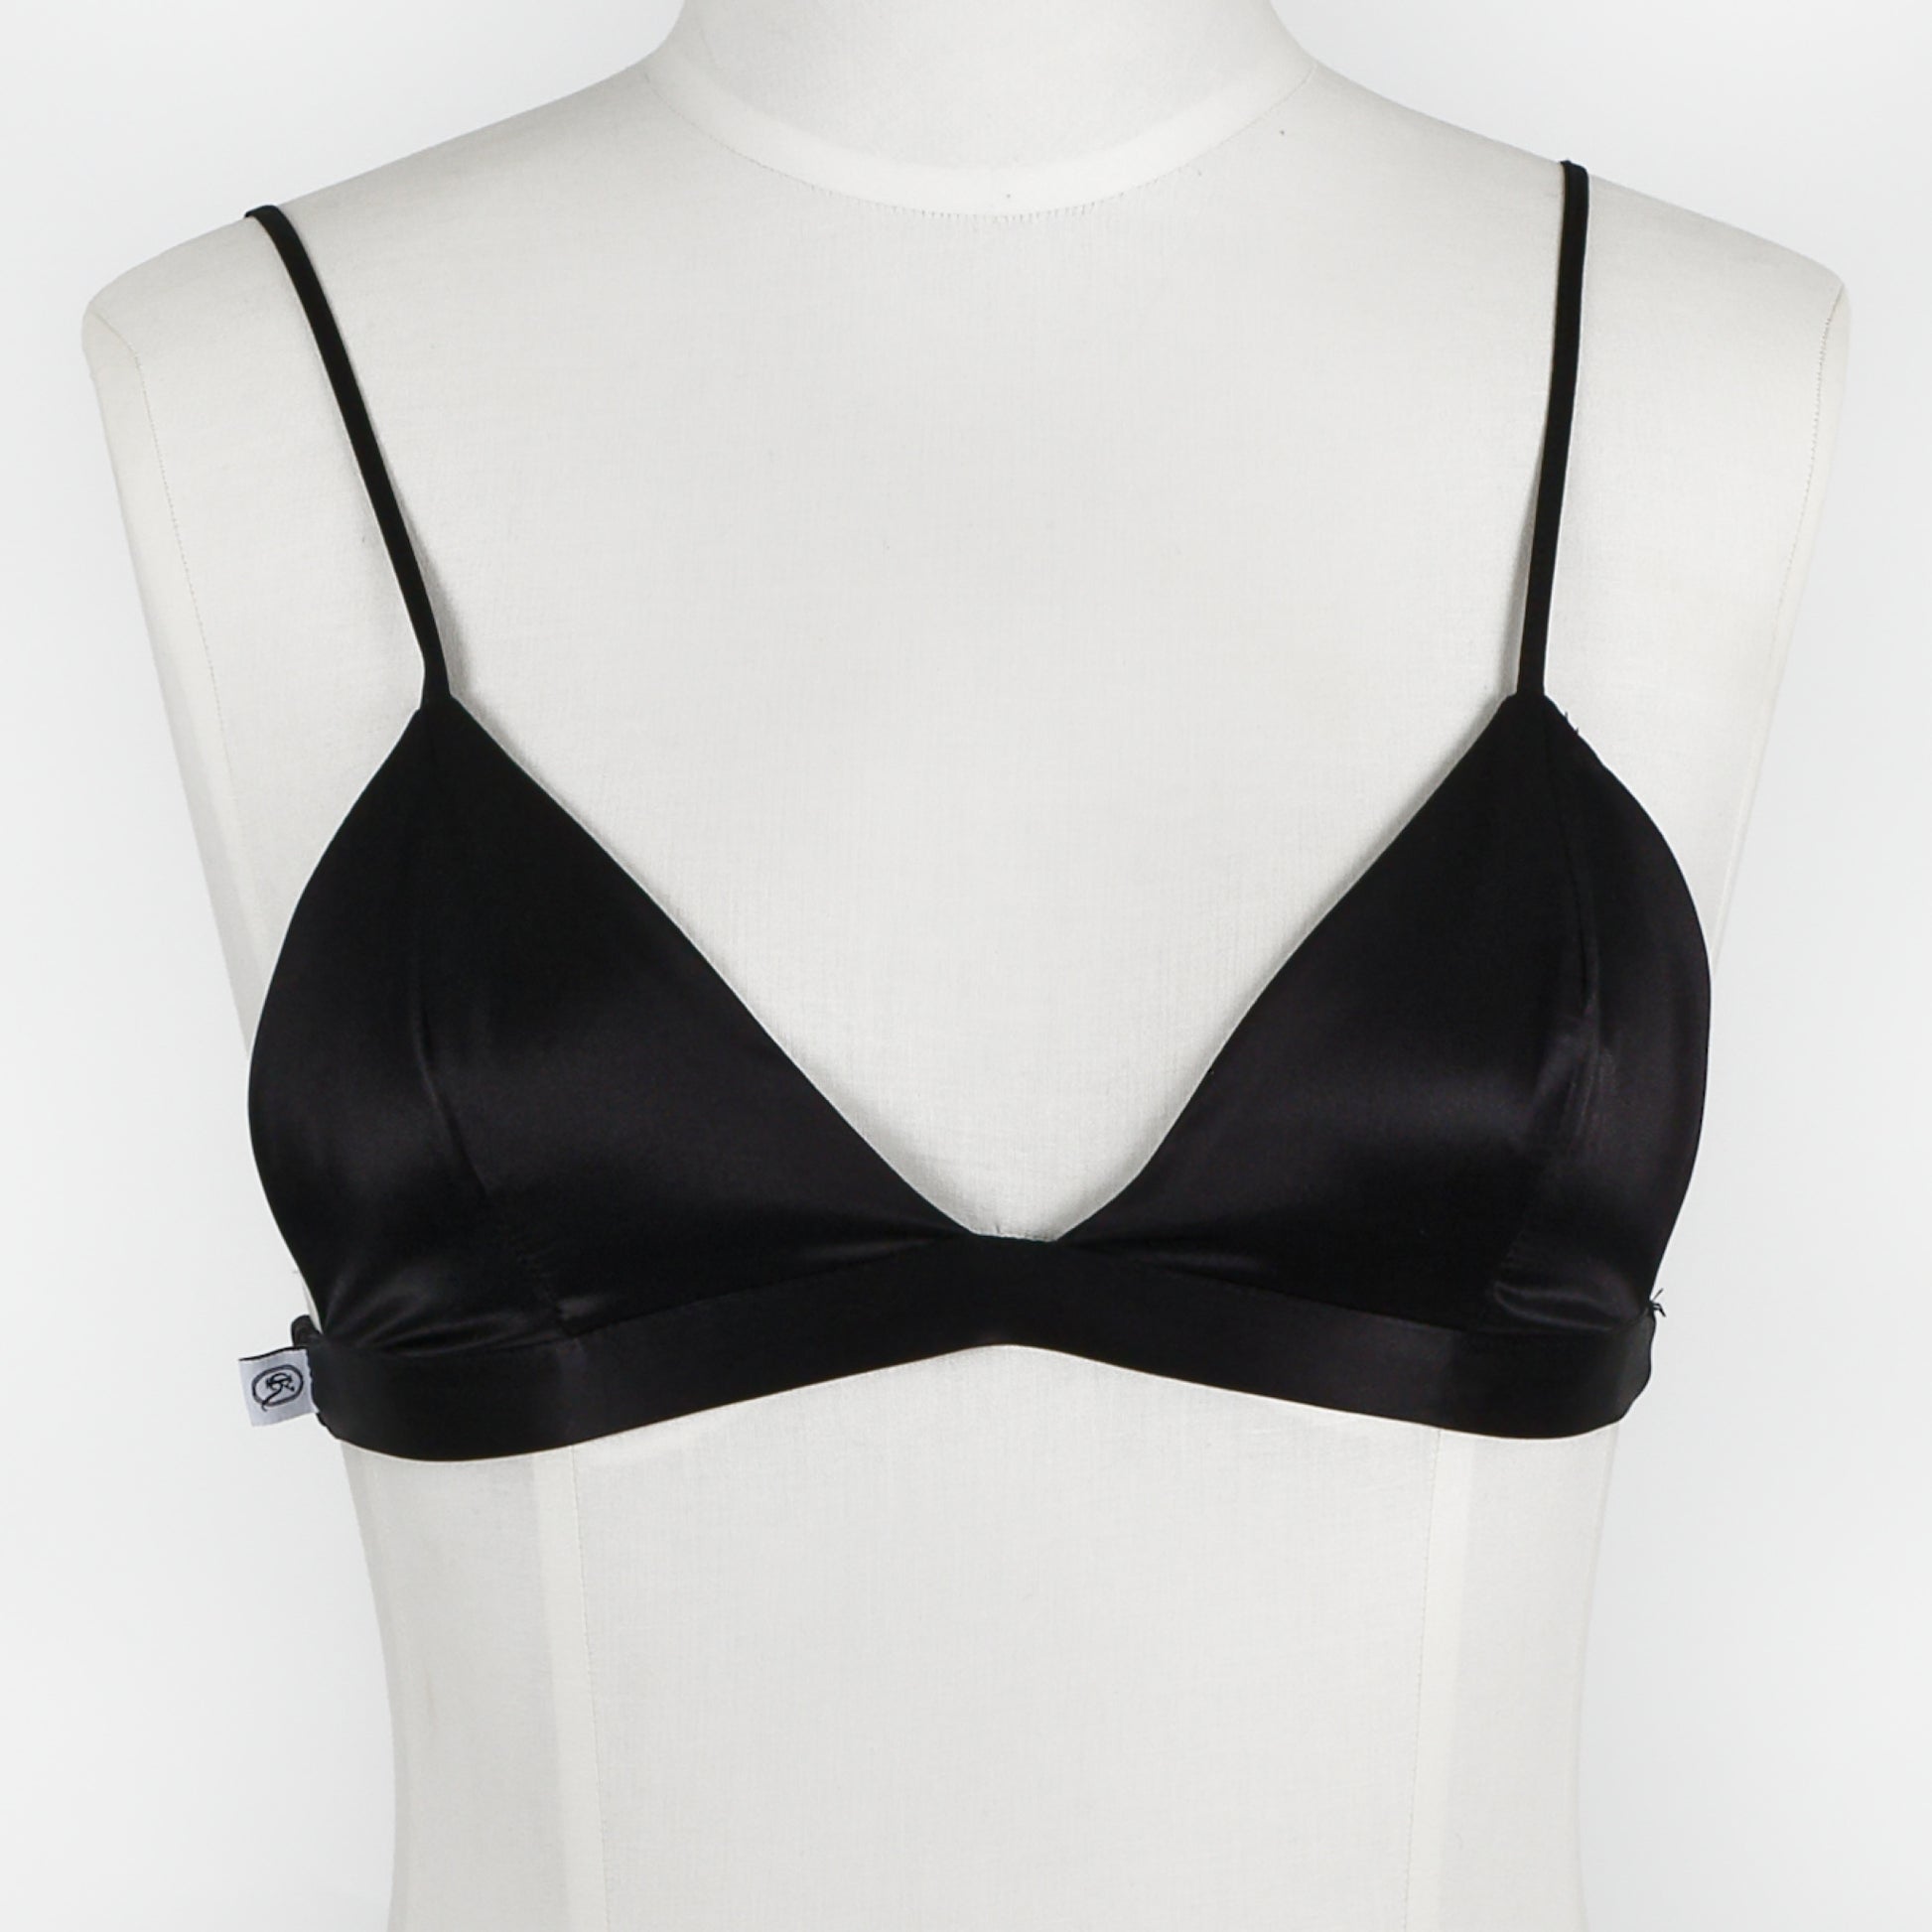 Satin triangle bra with branded elastic in Black for